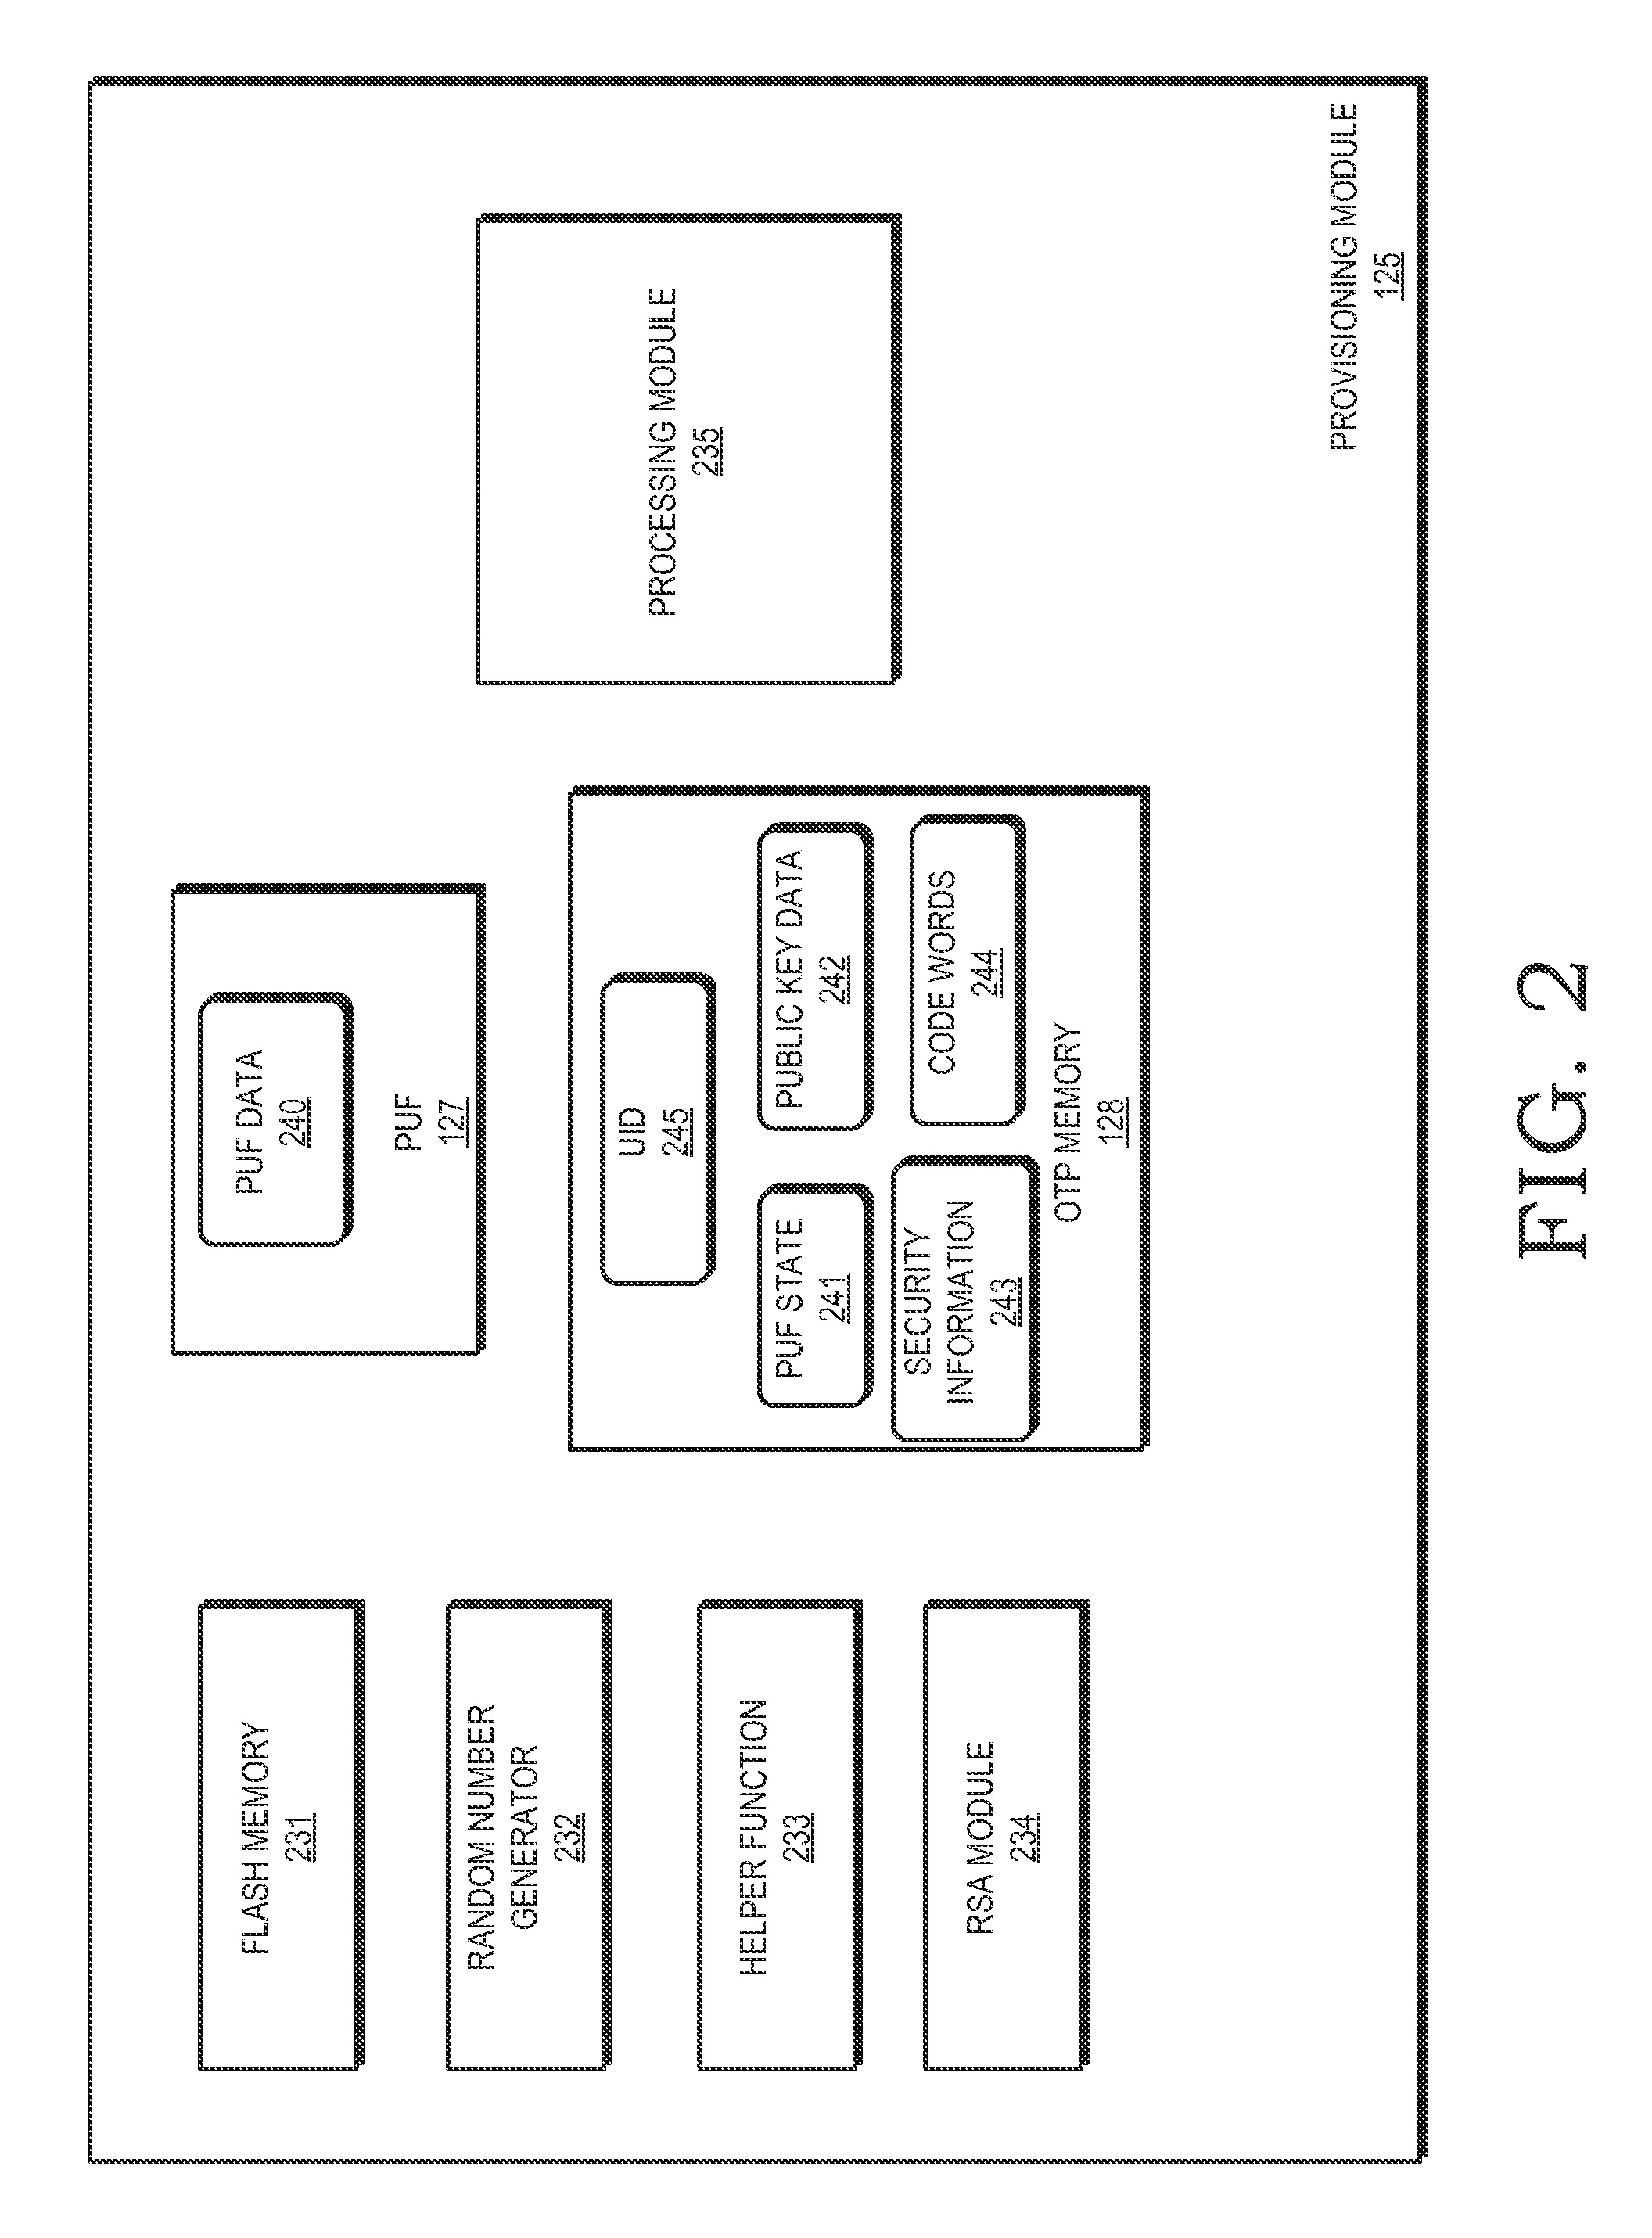 Integrated circuit provisioning using physical unclonable function